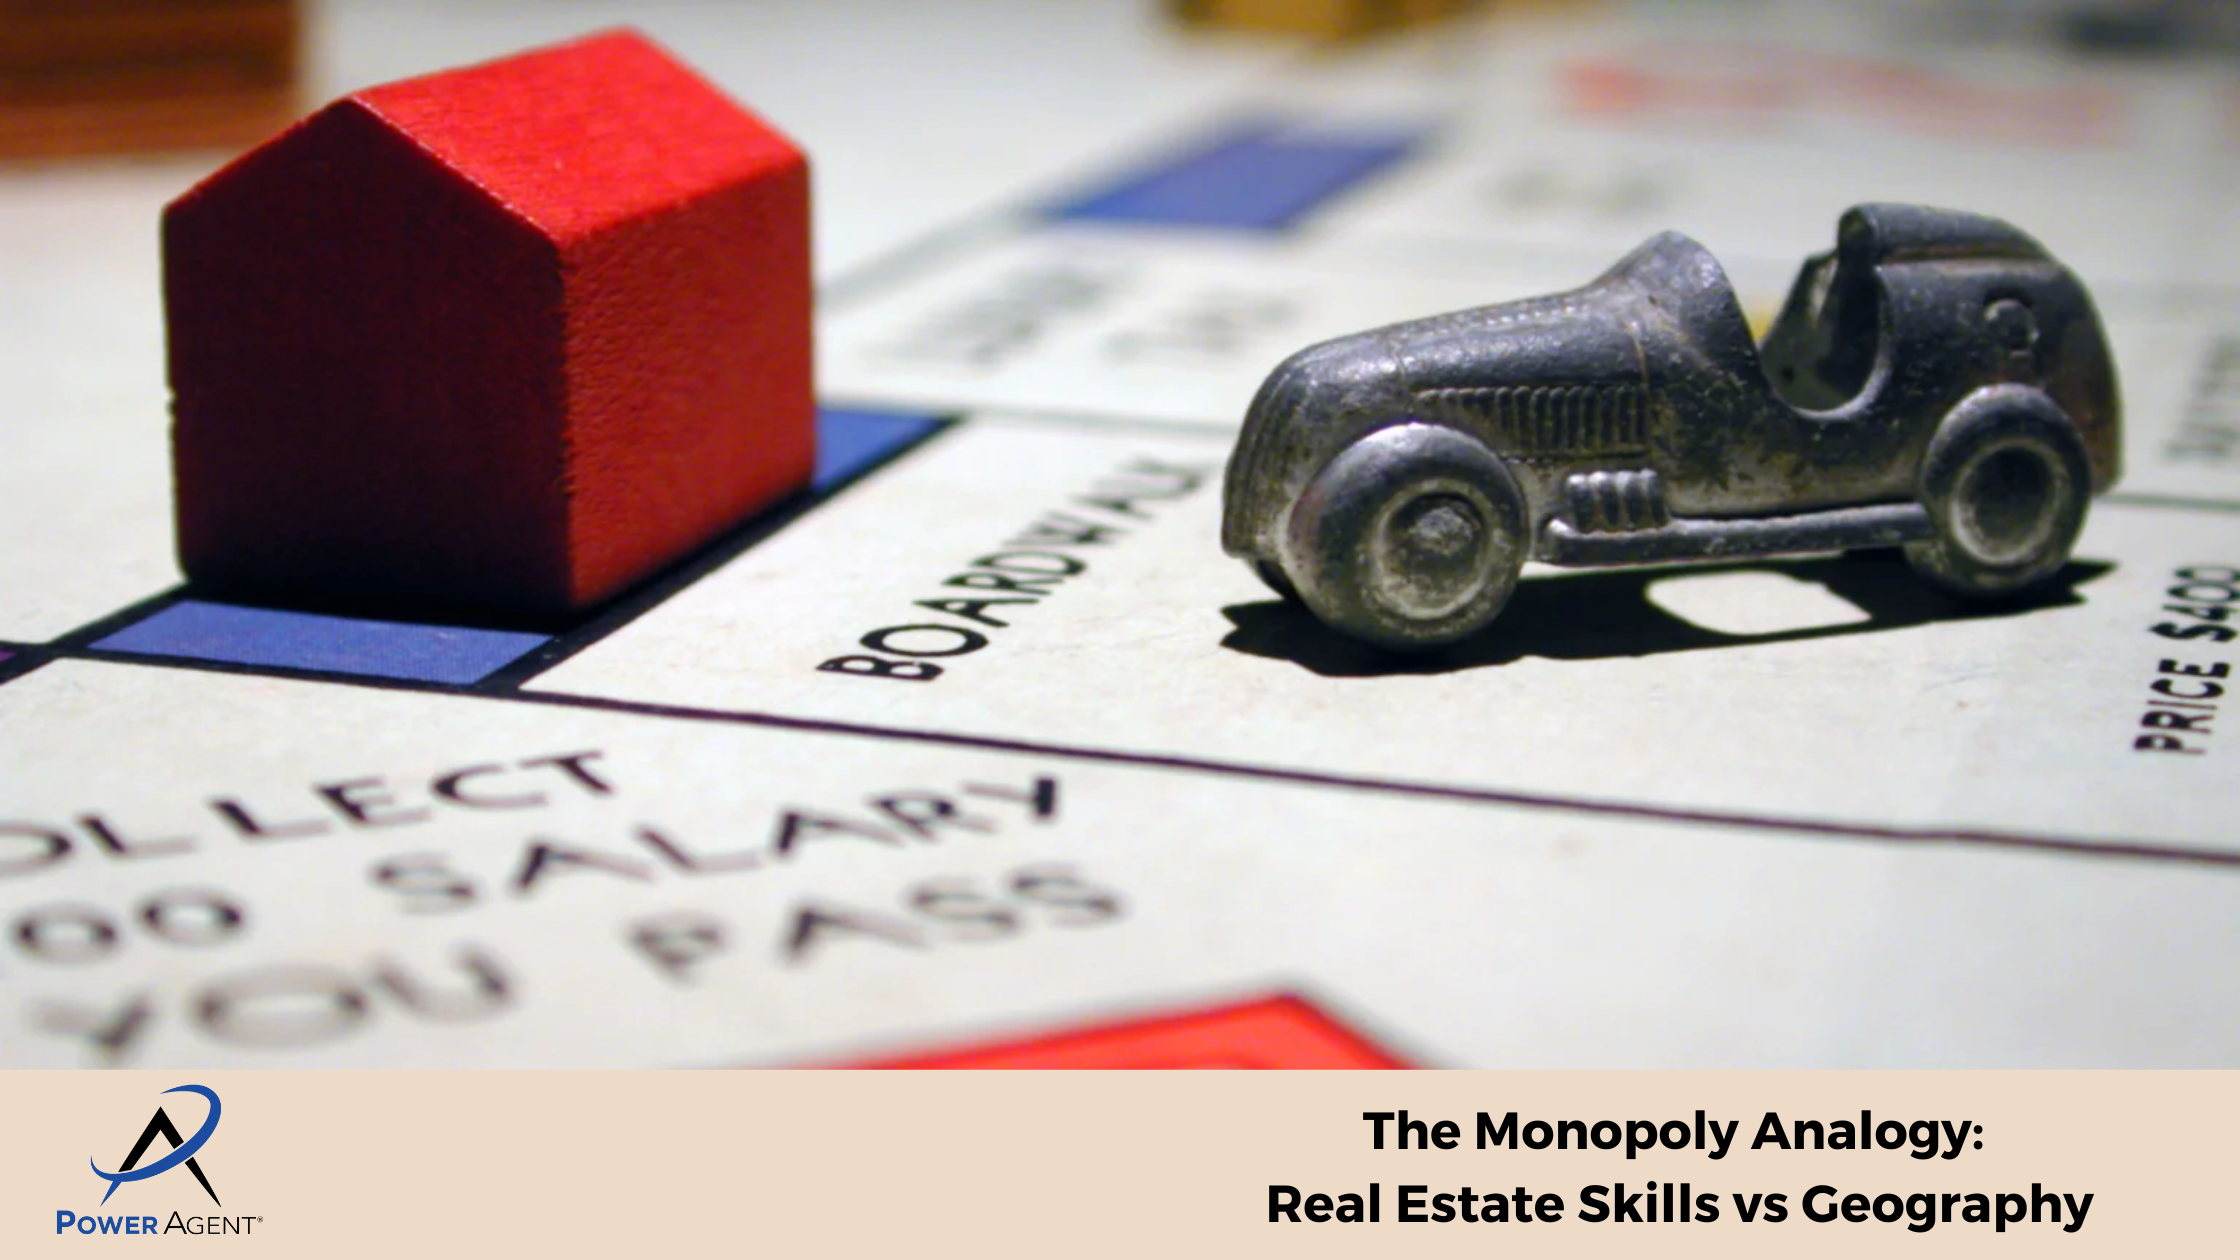 The Monopoly Analogy: Real Estate Skills vs Geography